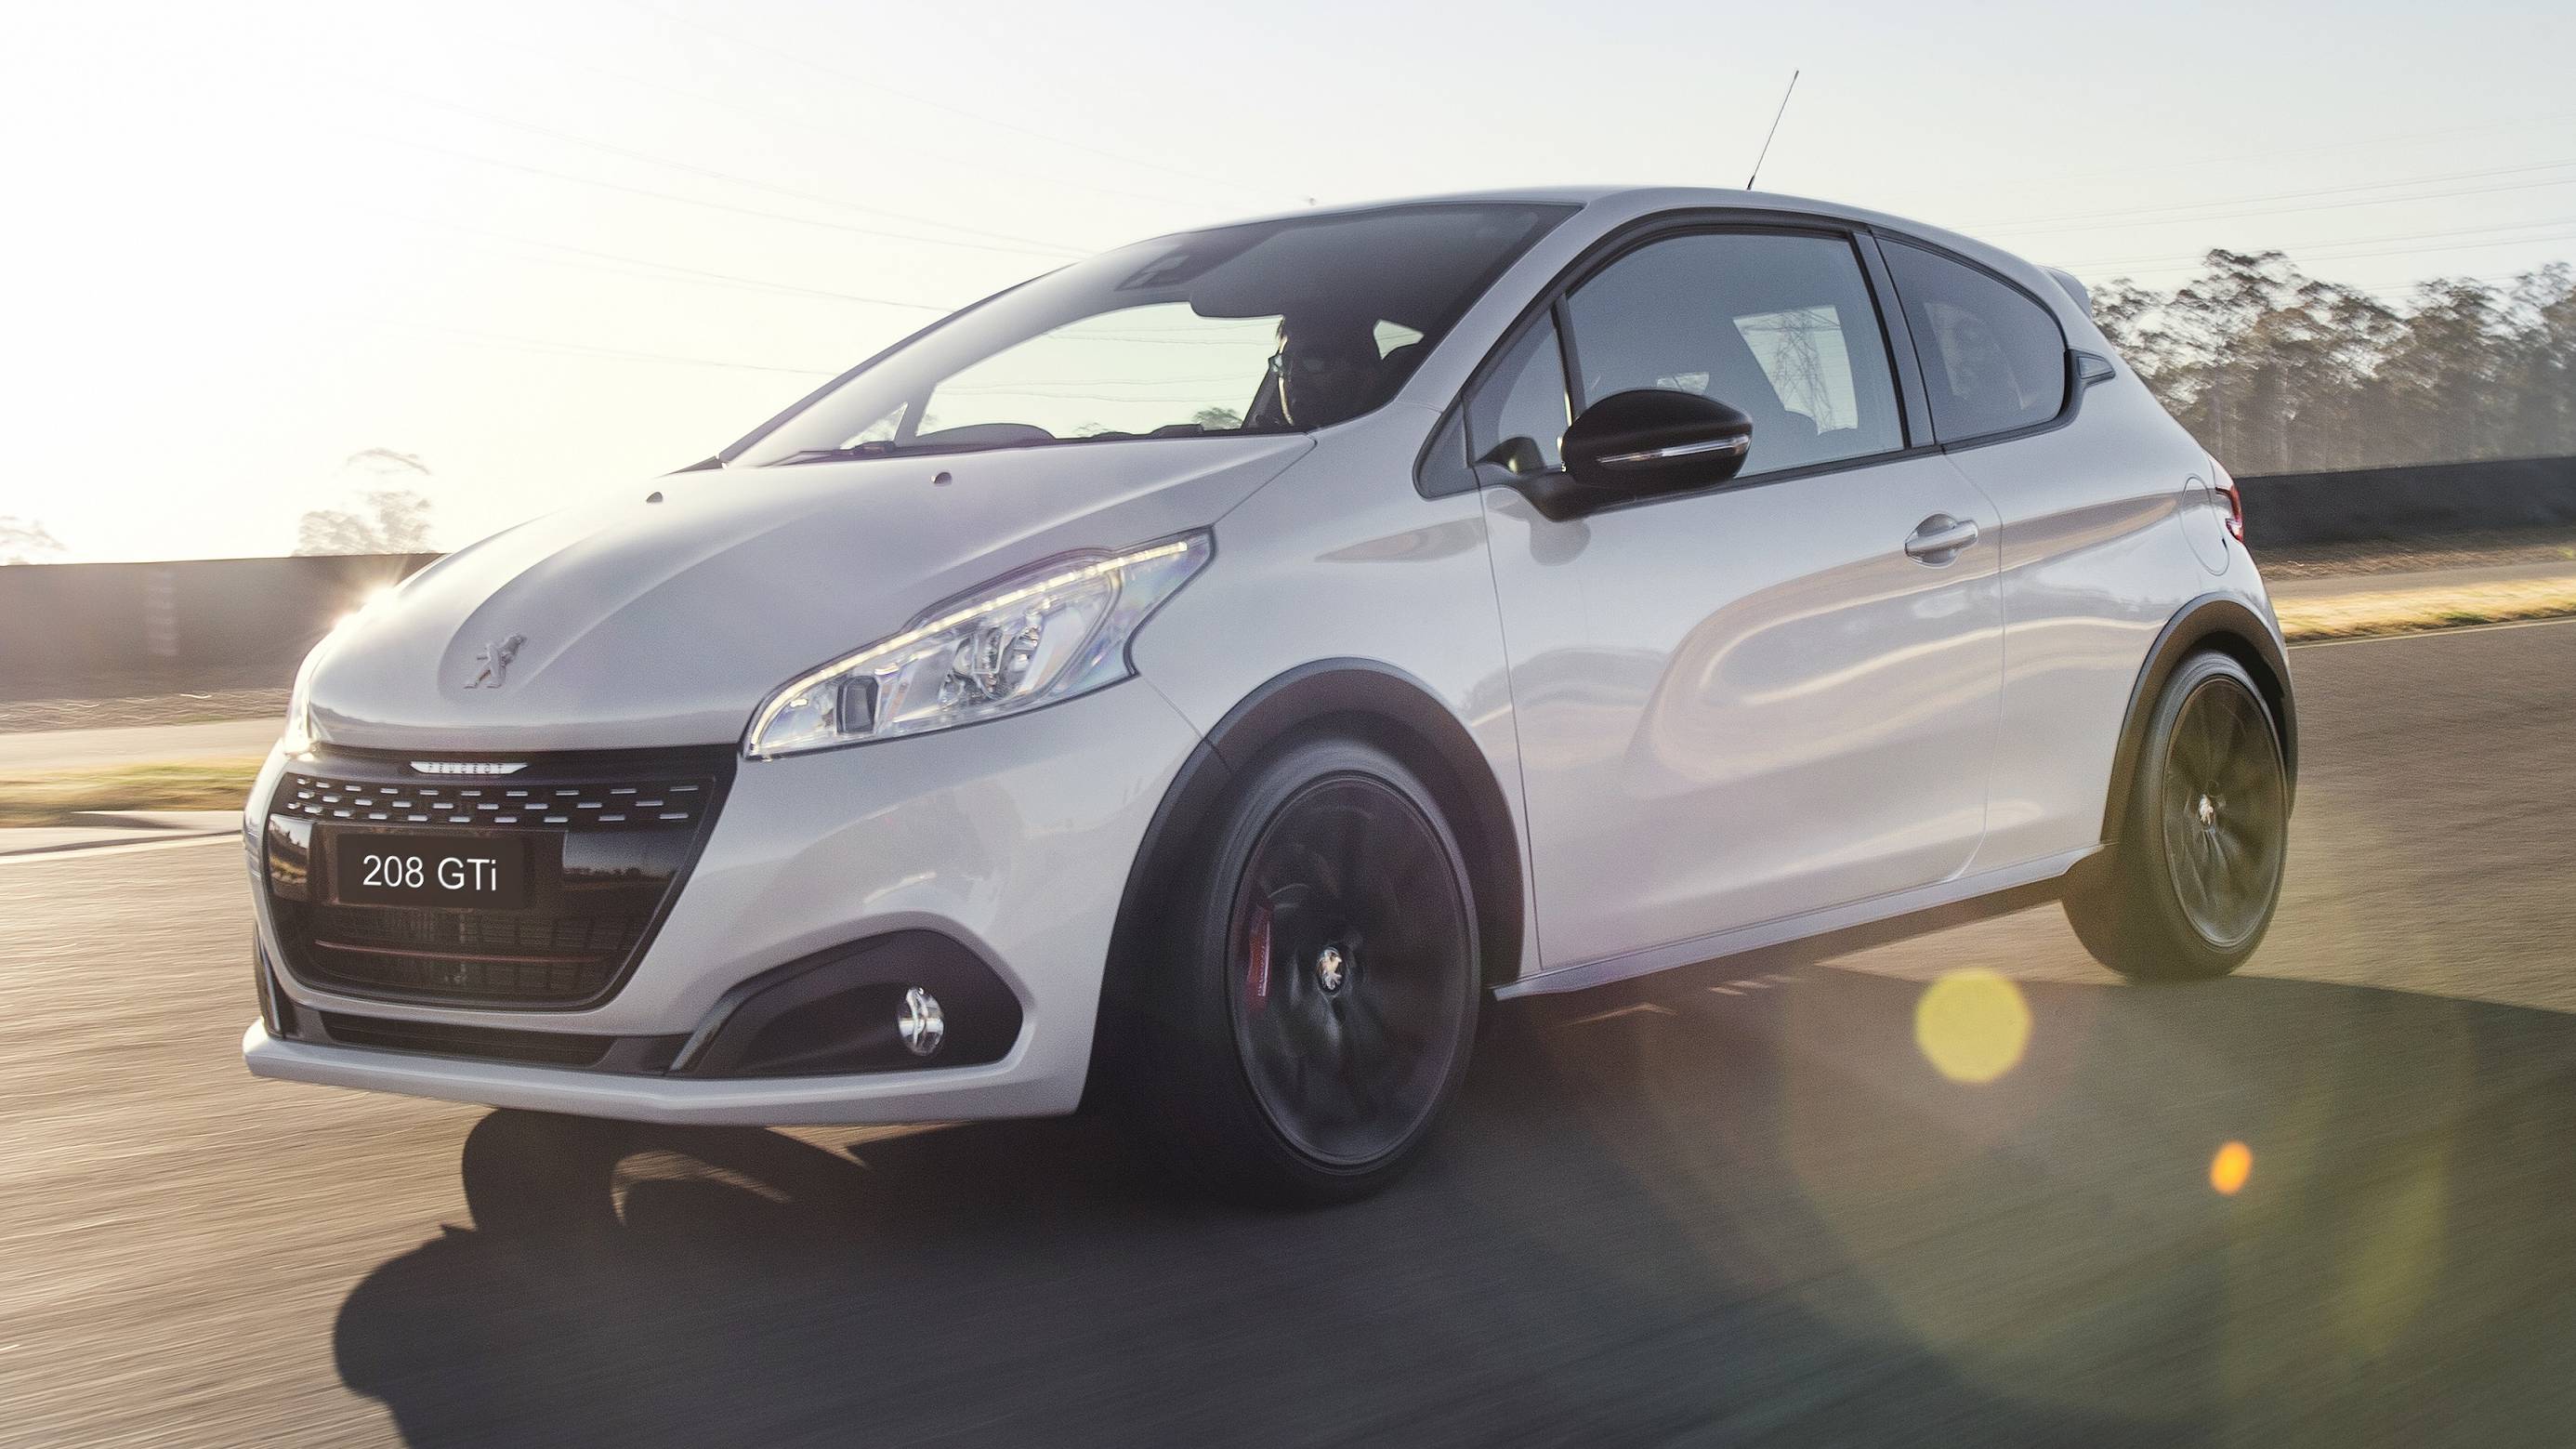 News 8 Gti Edition Definitive Launched Tuned By Peugeot Sport